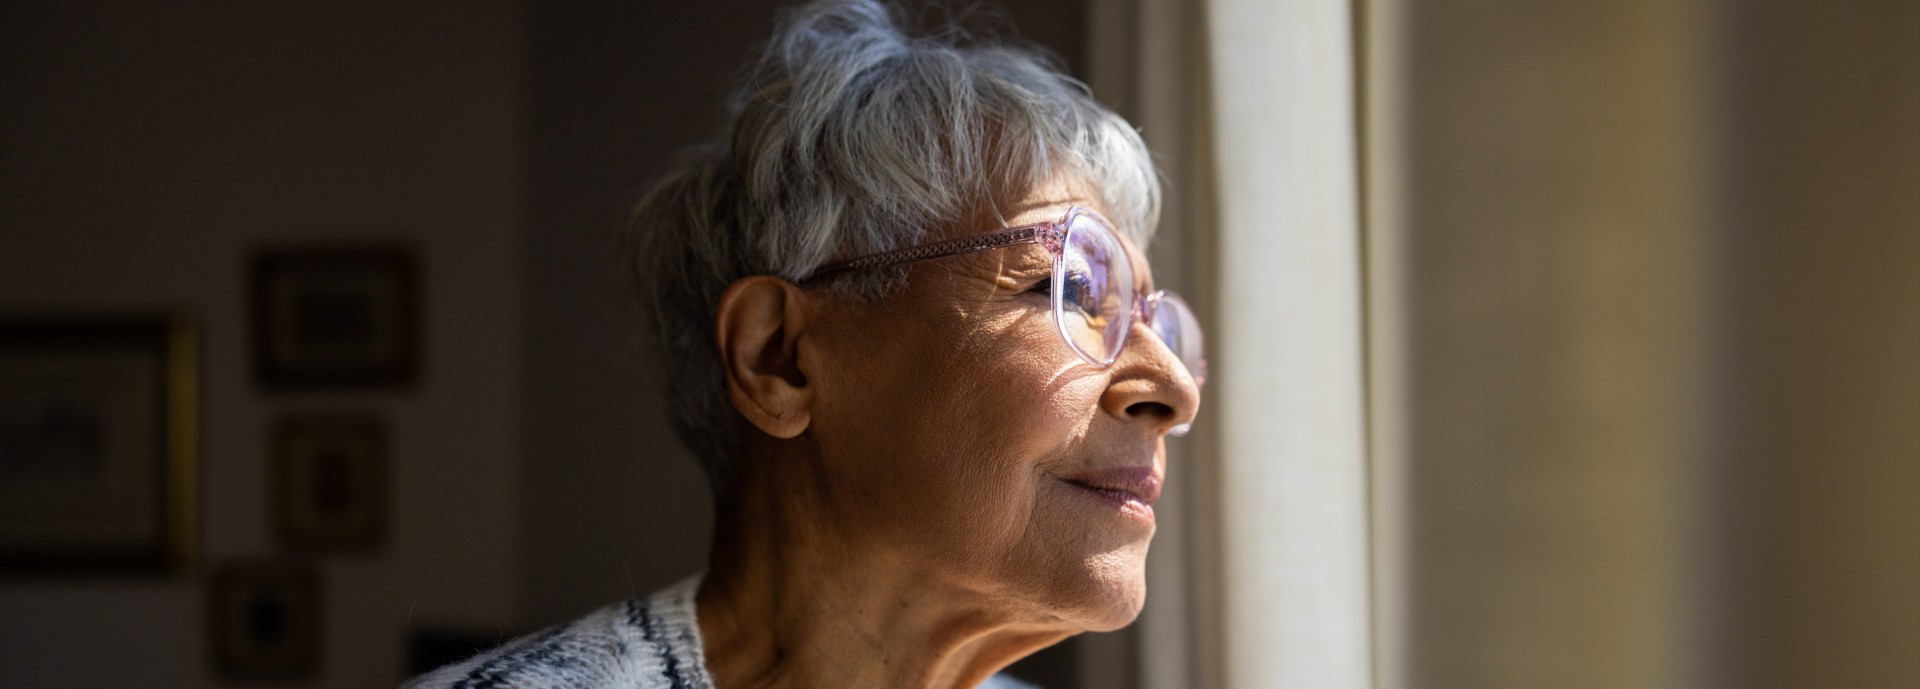 Older person looks out of window